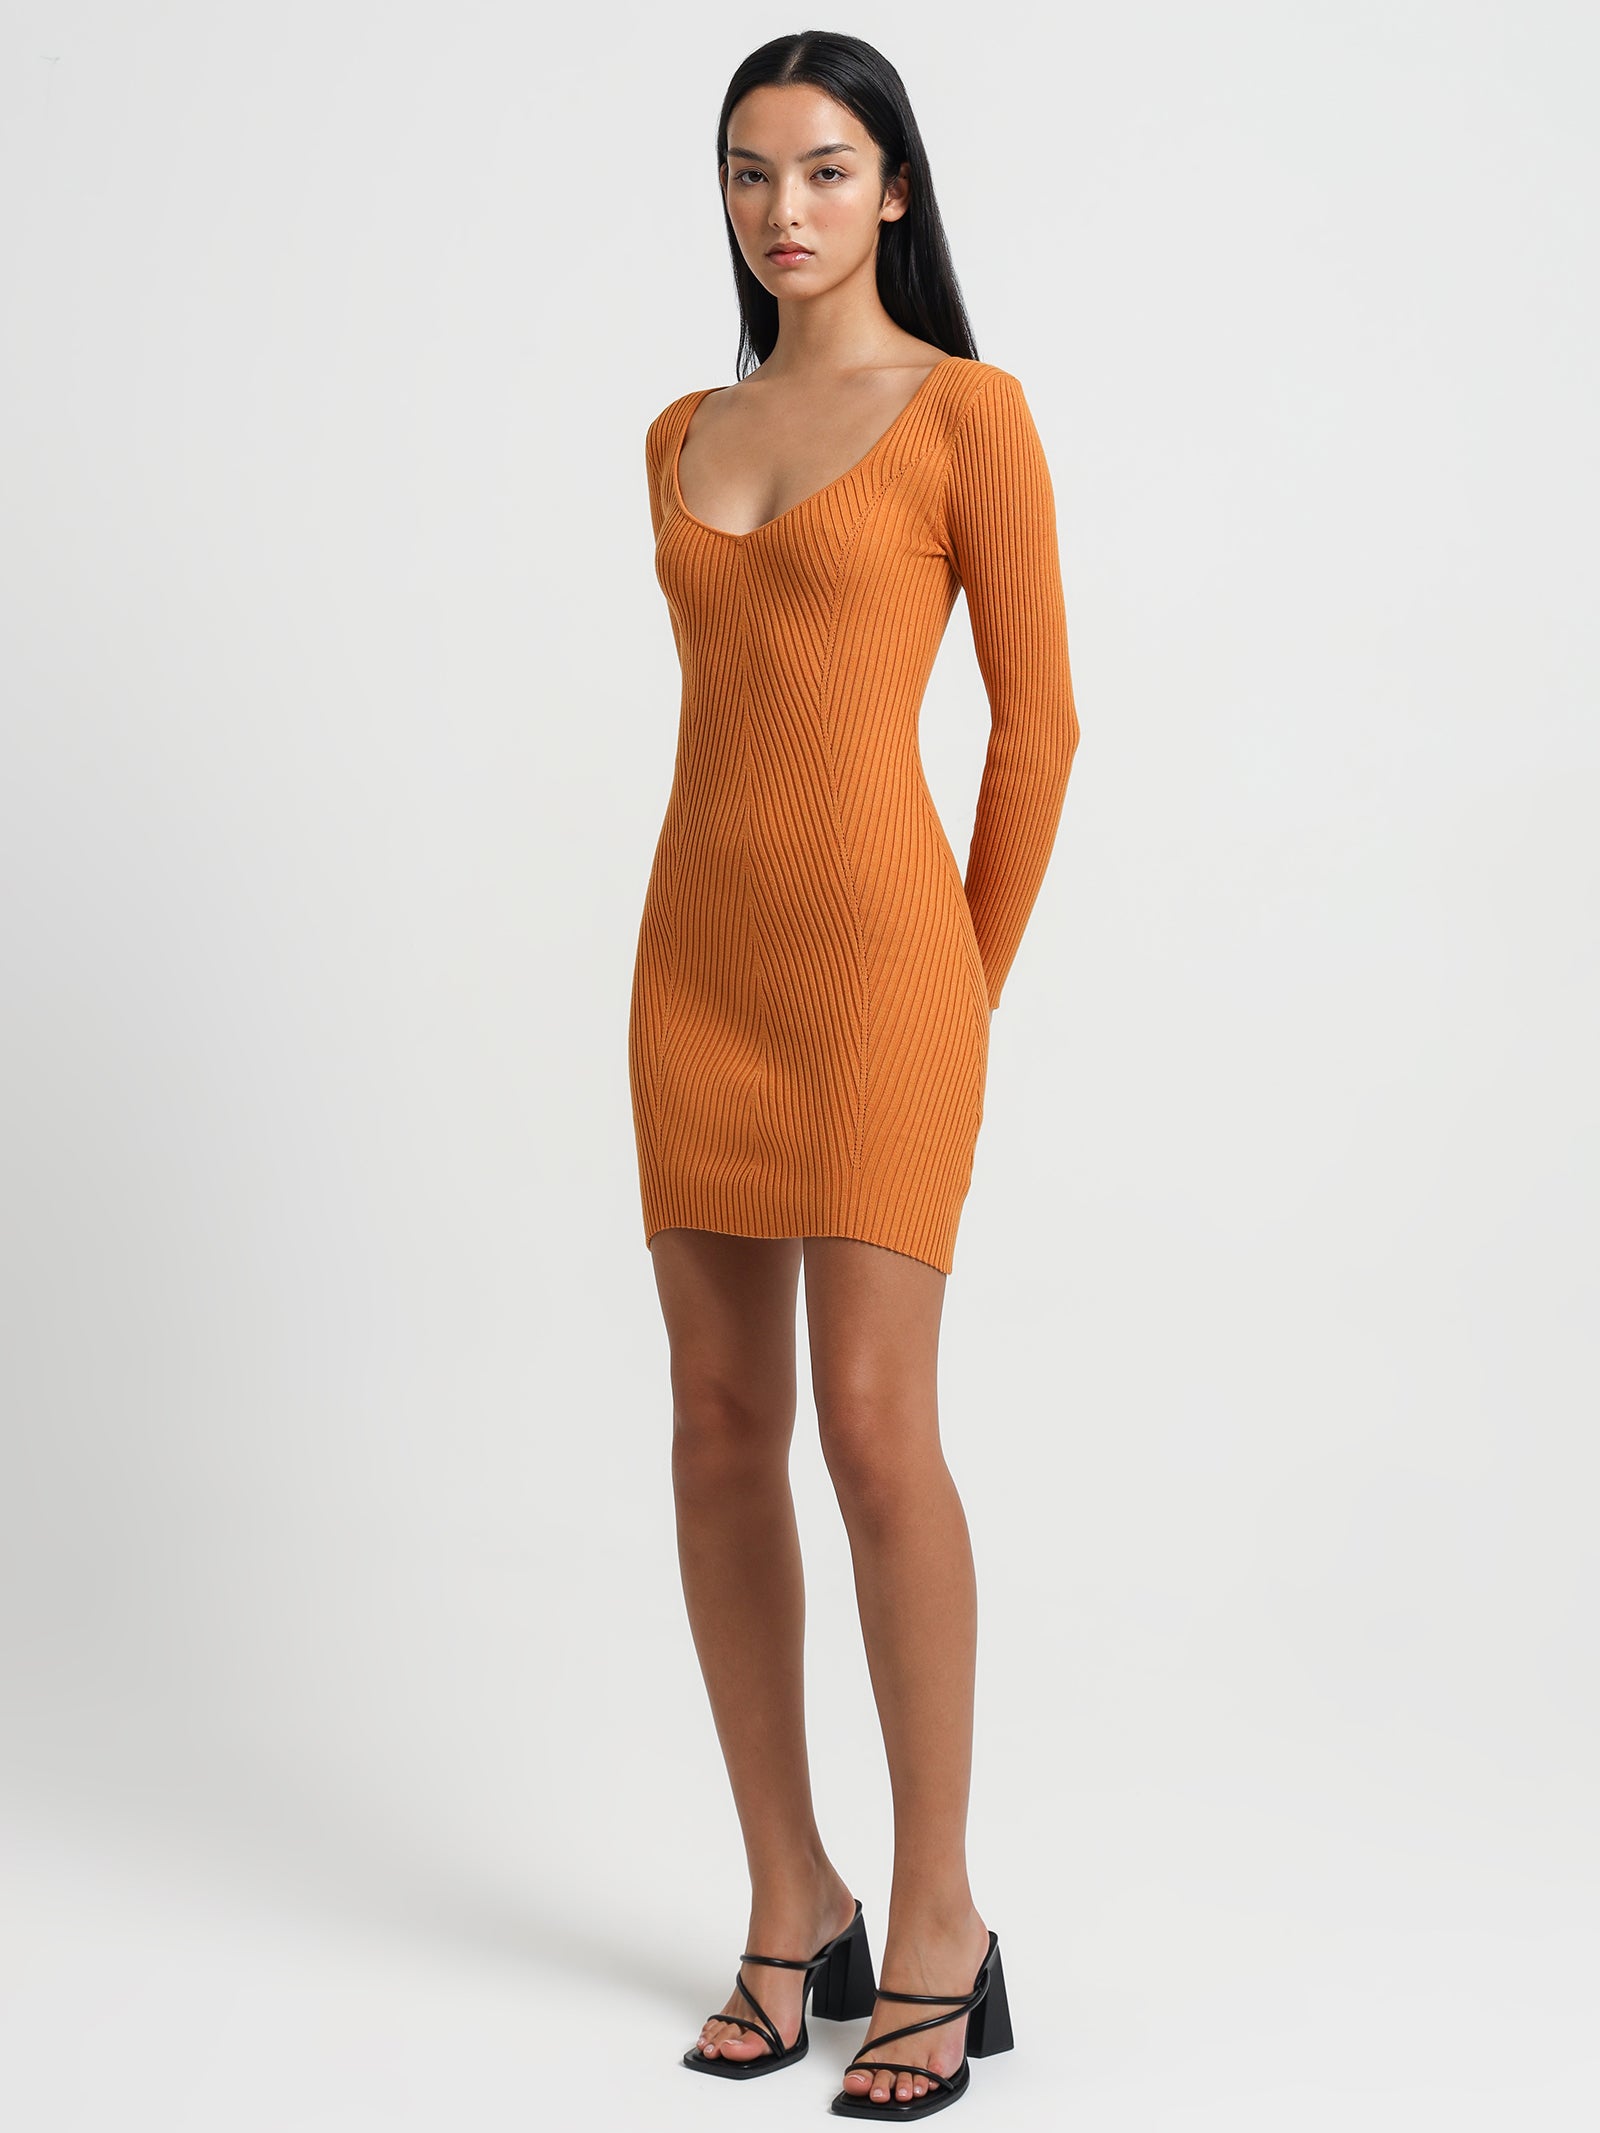 Elsa Knitted Dress in Marigold